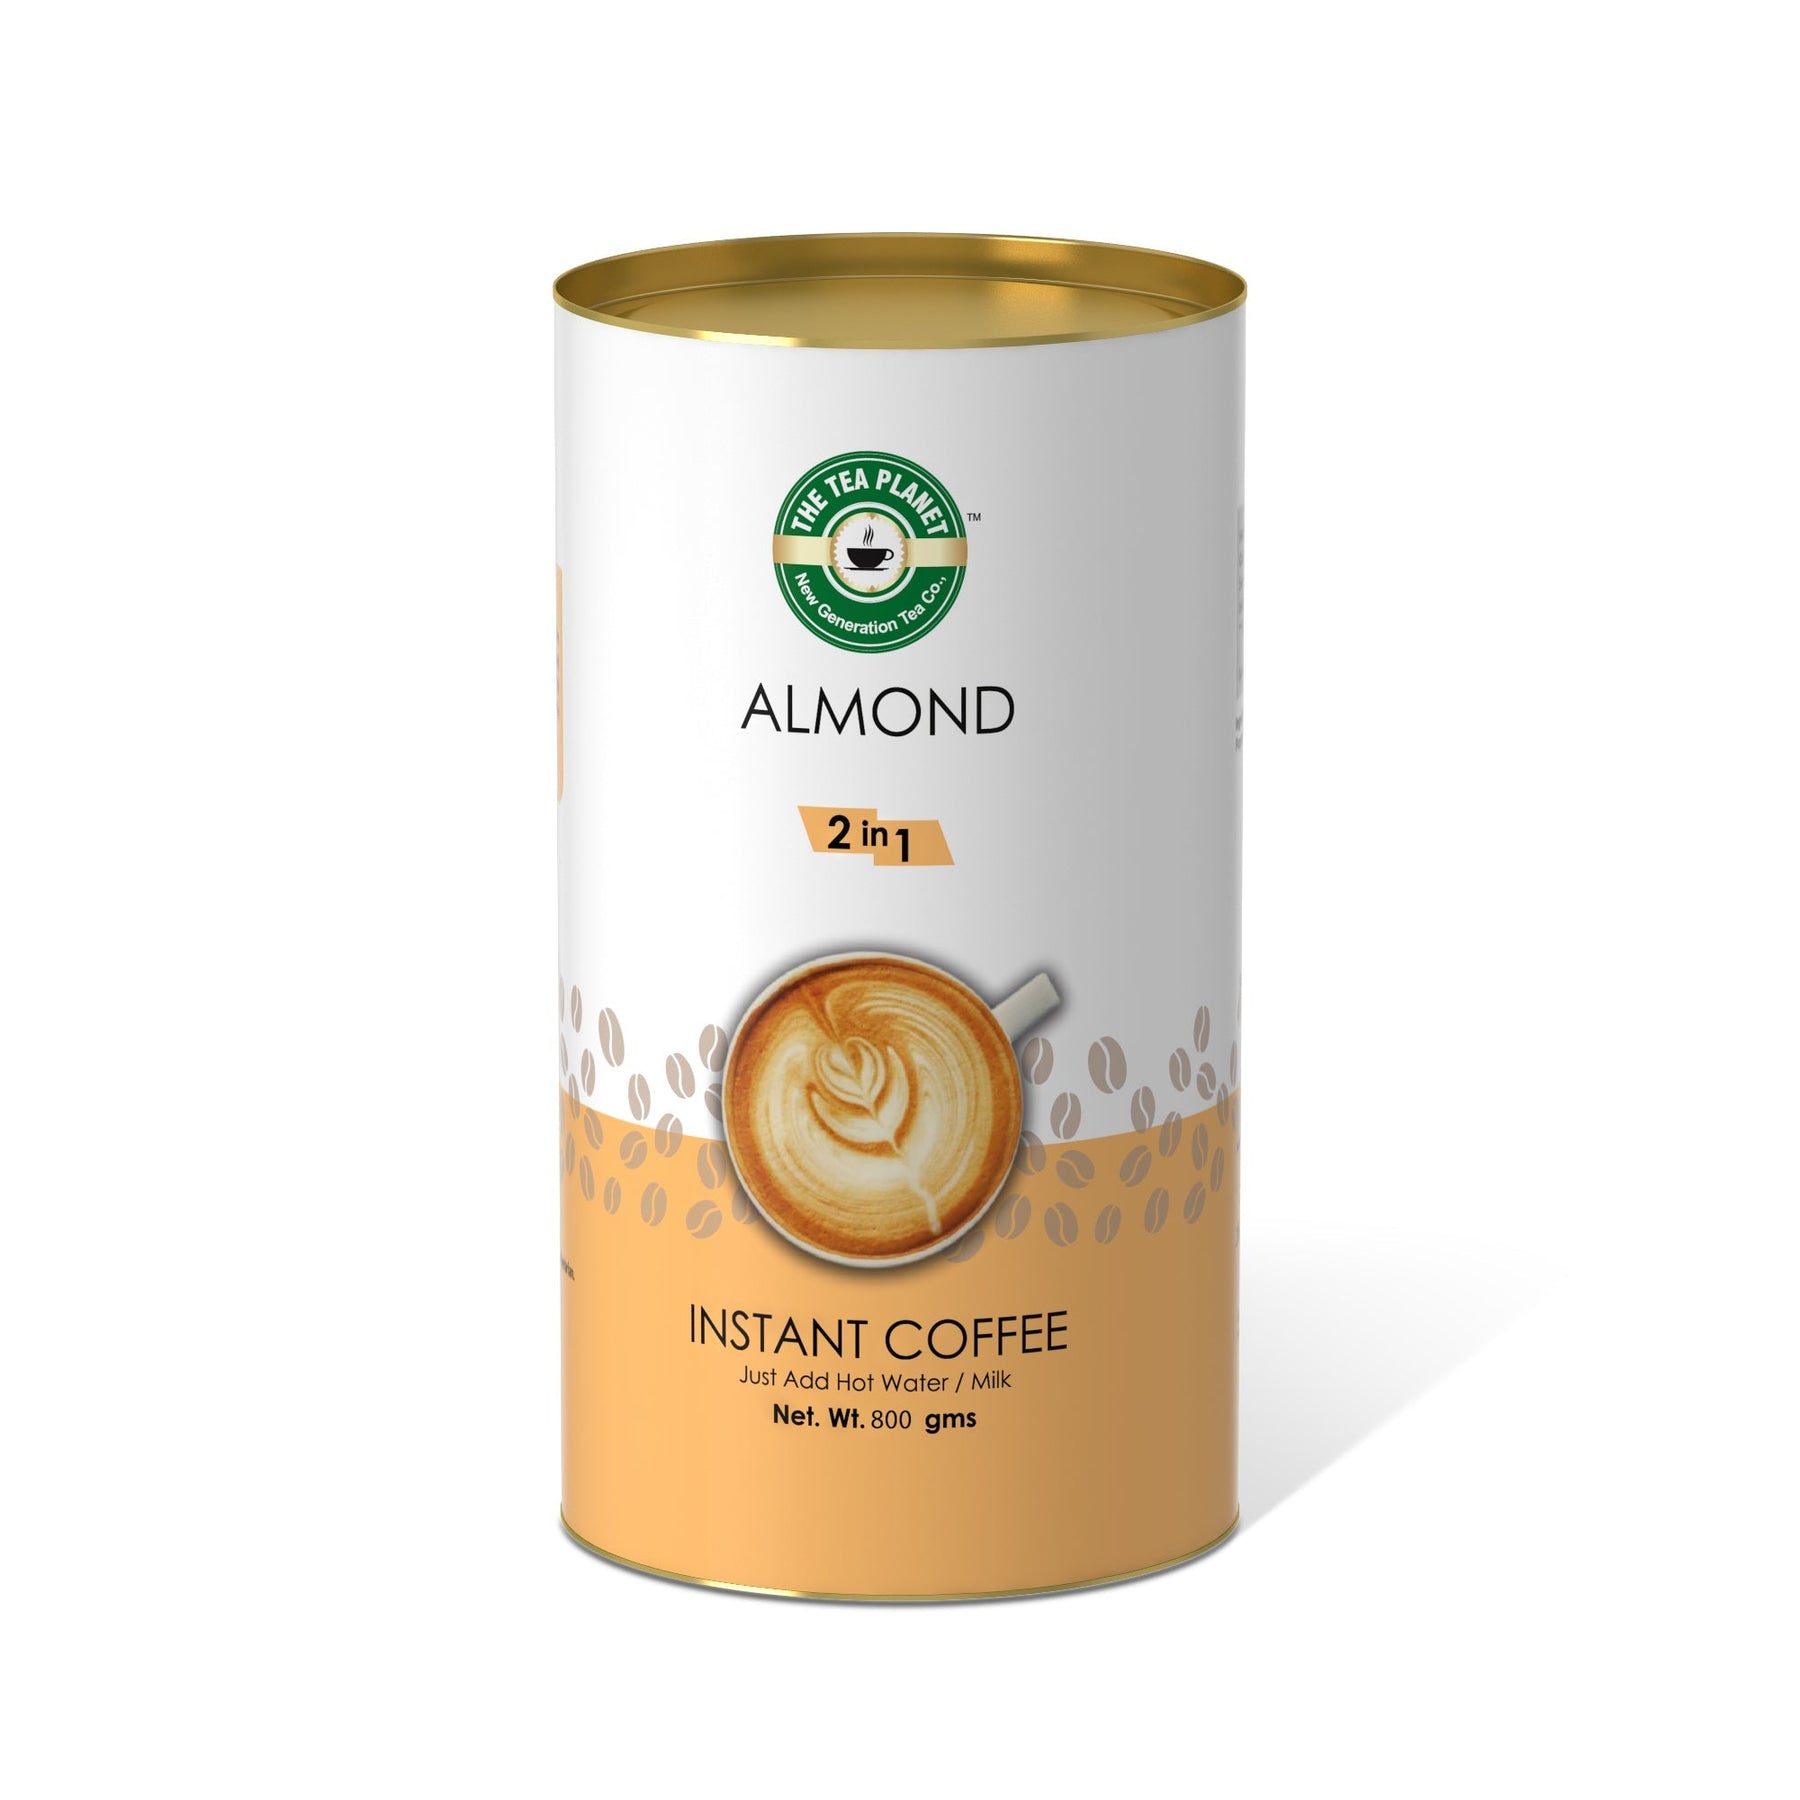 Almond Instant Coffee Premix (2 in 1) - 400 gms